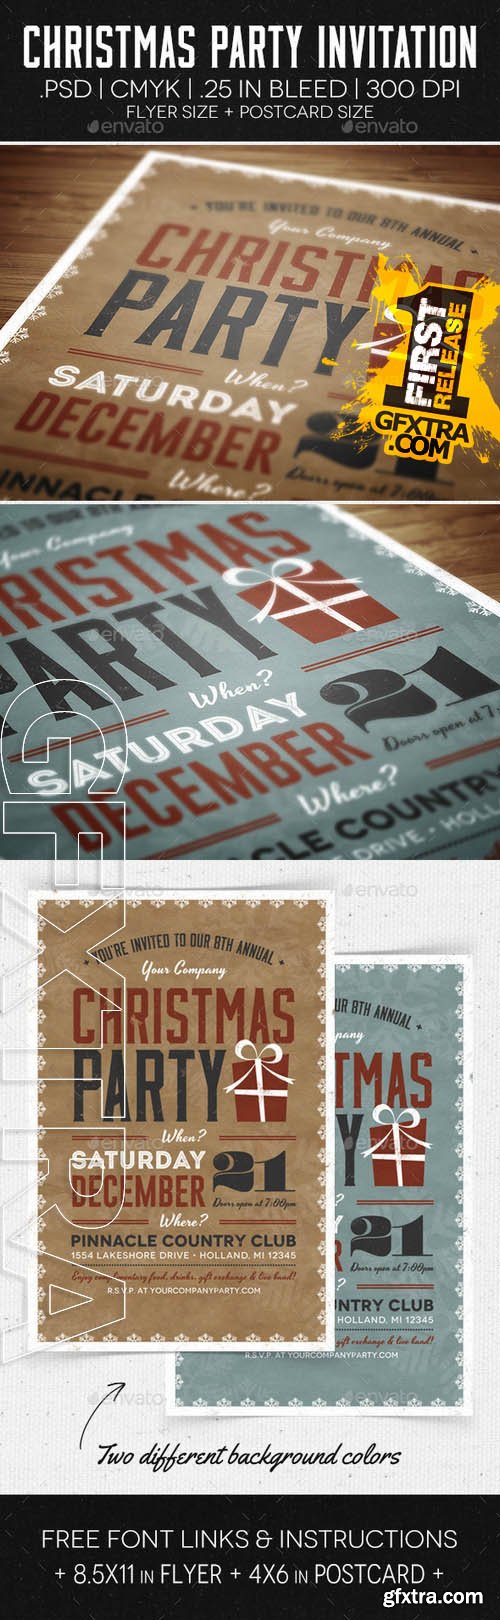 Christmas Party Flyer & Invitation - Graphicriver 6176445